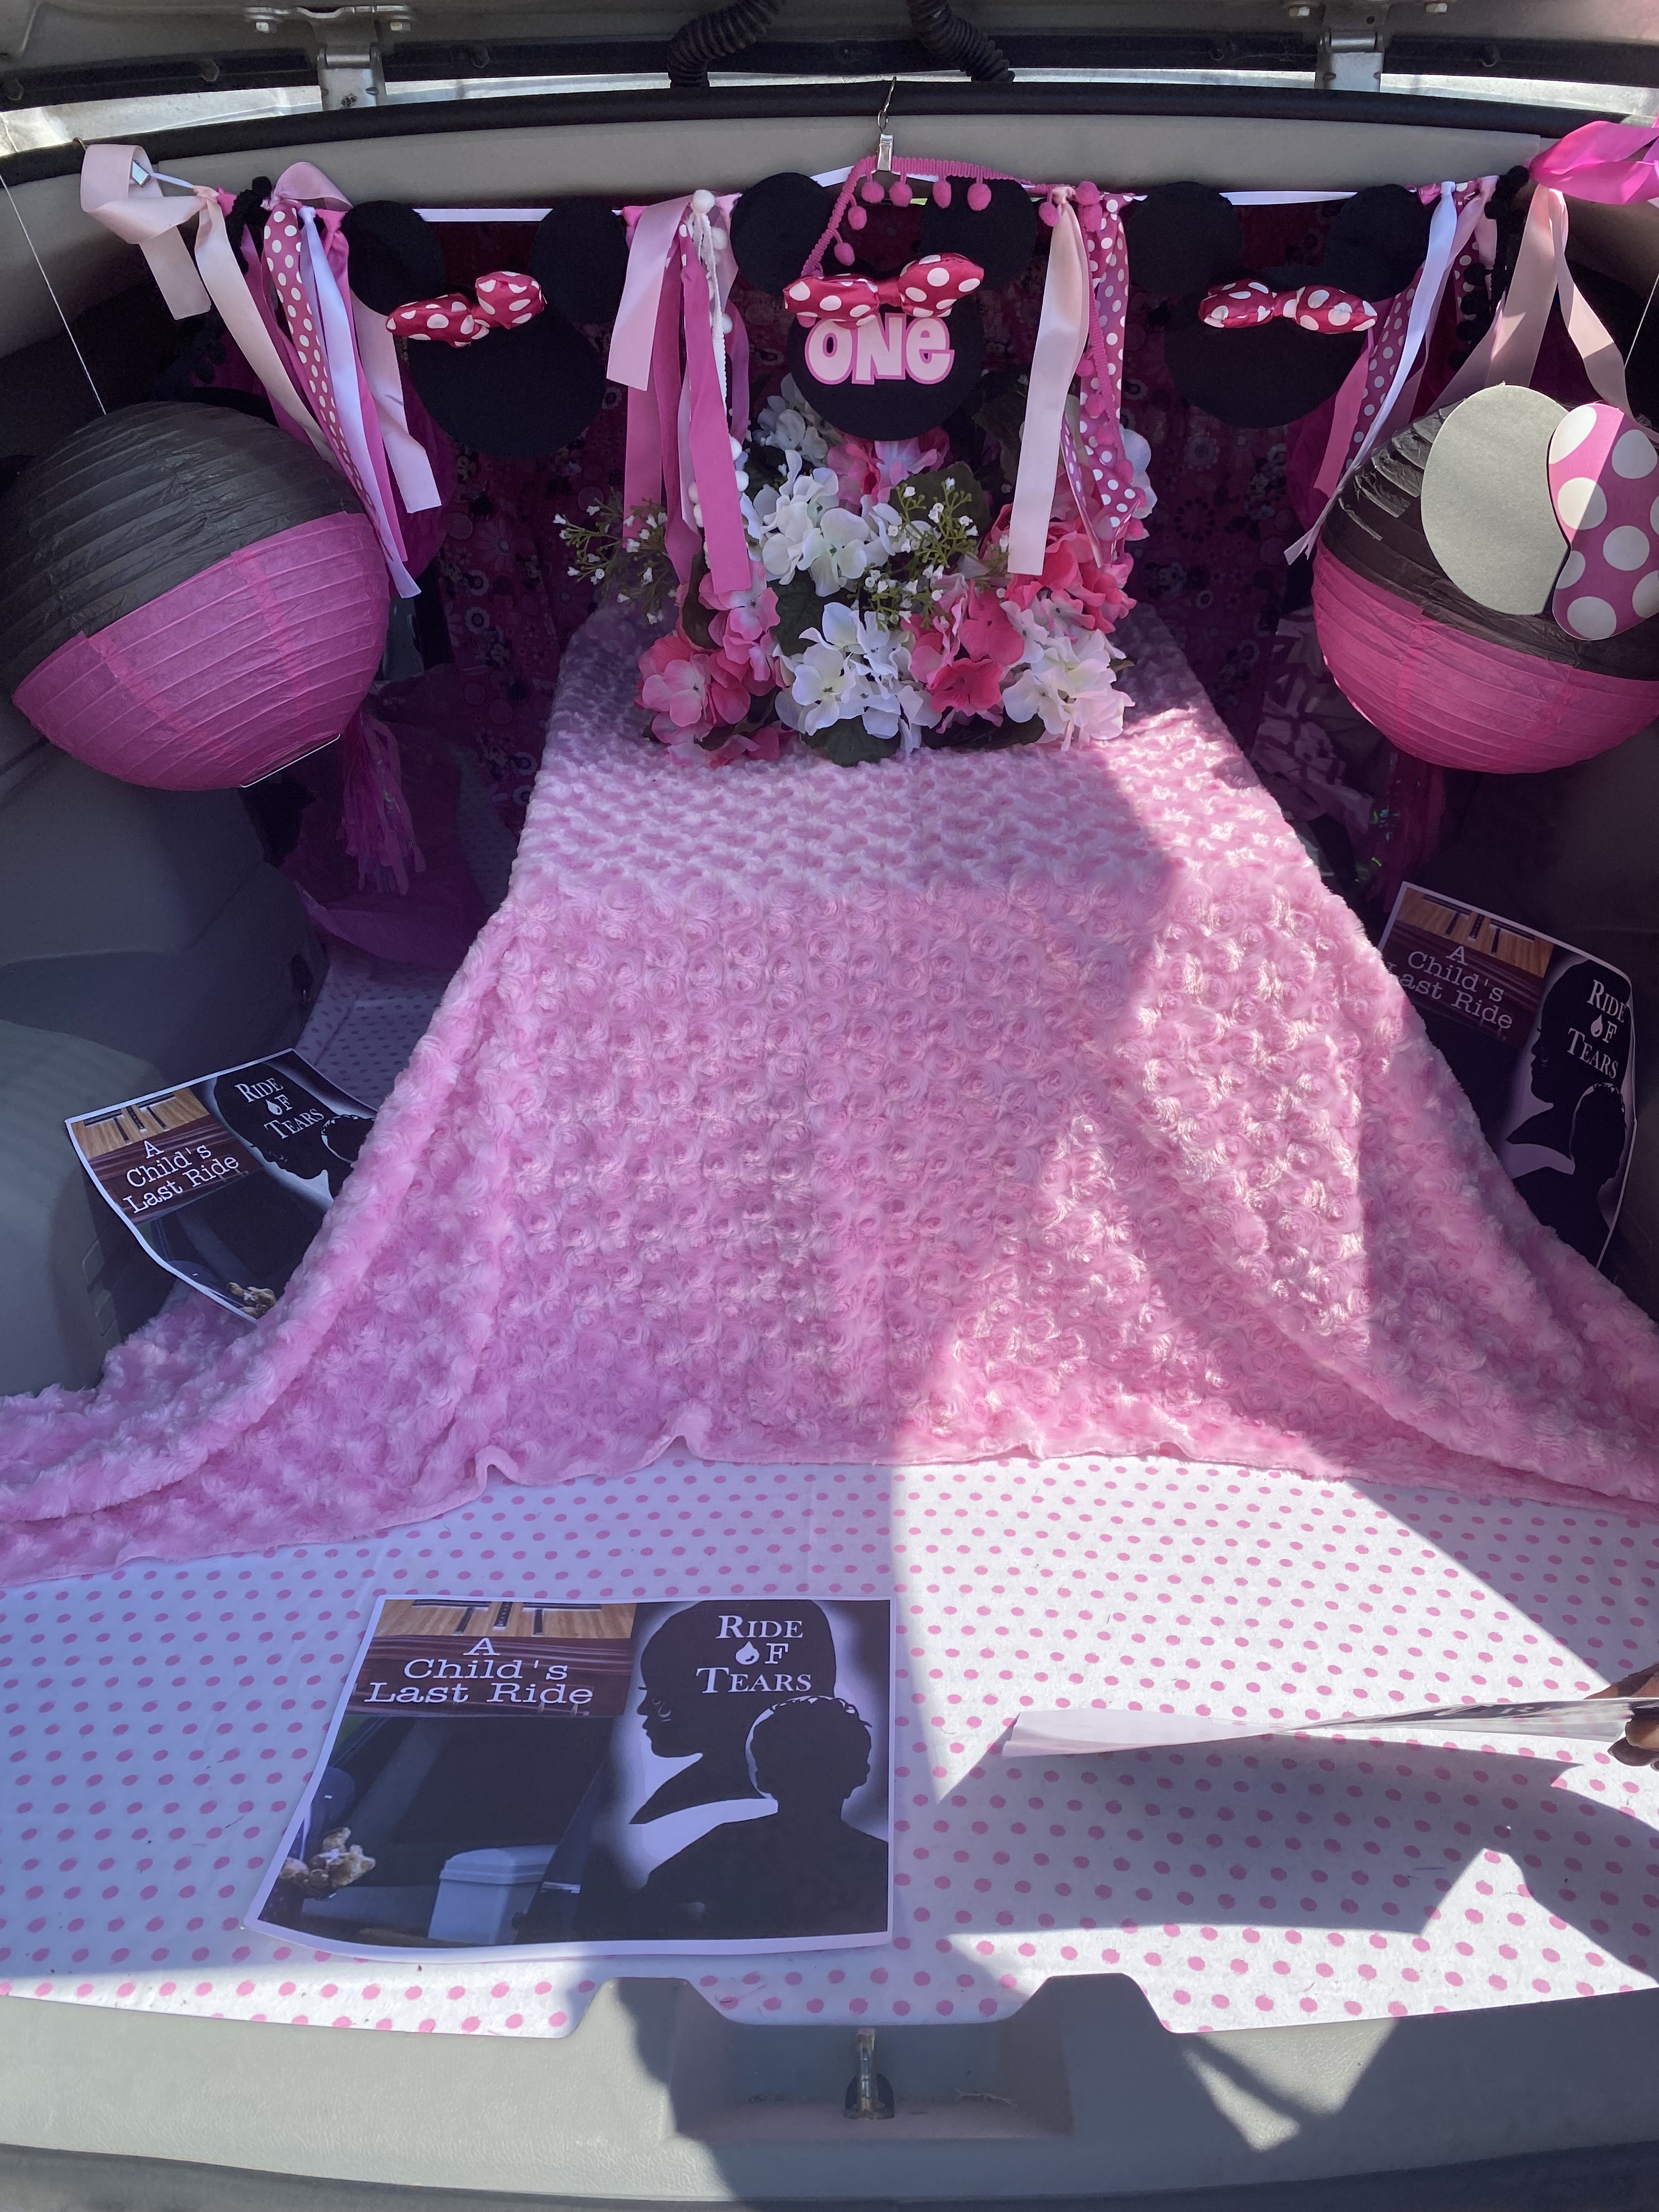 An empty child-sized casket sits in the back of a hearse that Mary Trice drives around Memphis, Tenn., to call attention to children killed by guns. (Courtesy Mary Trice)